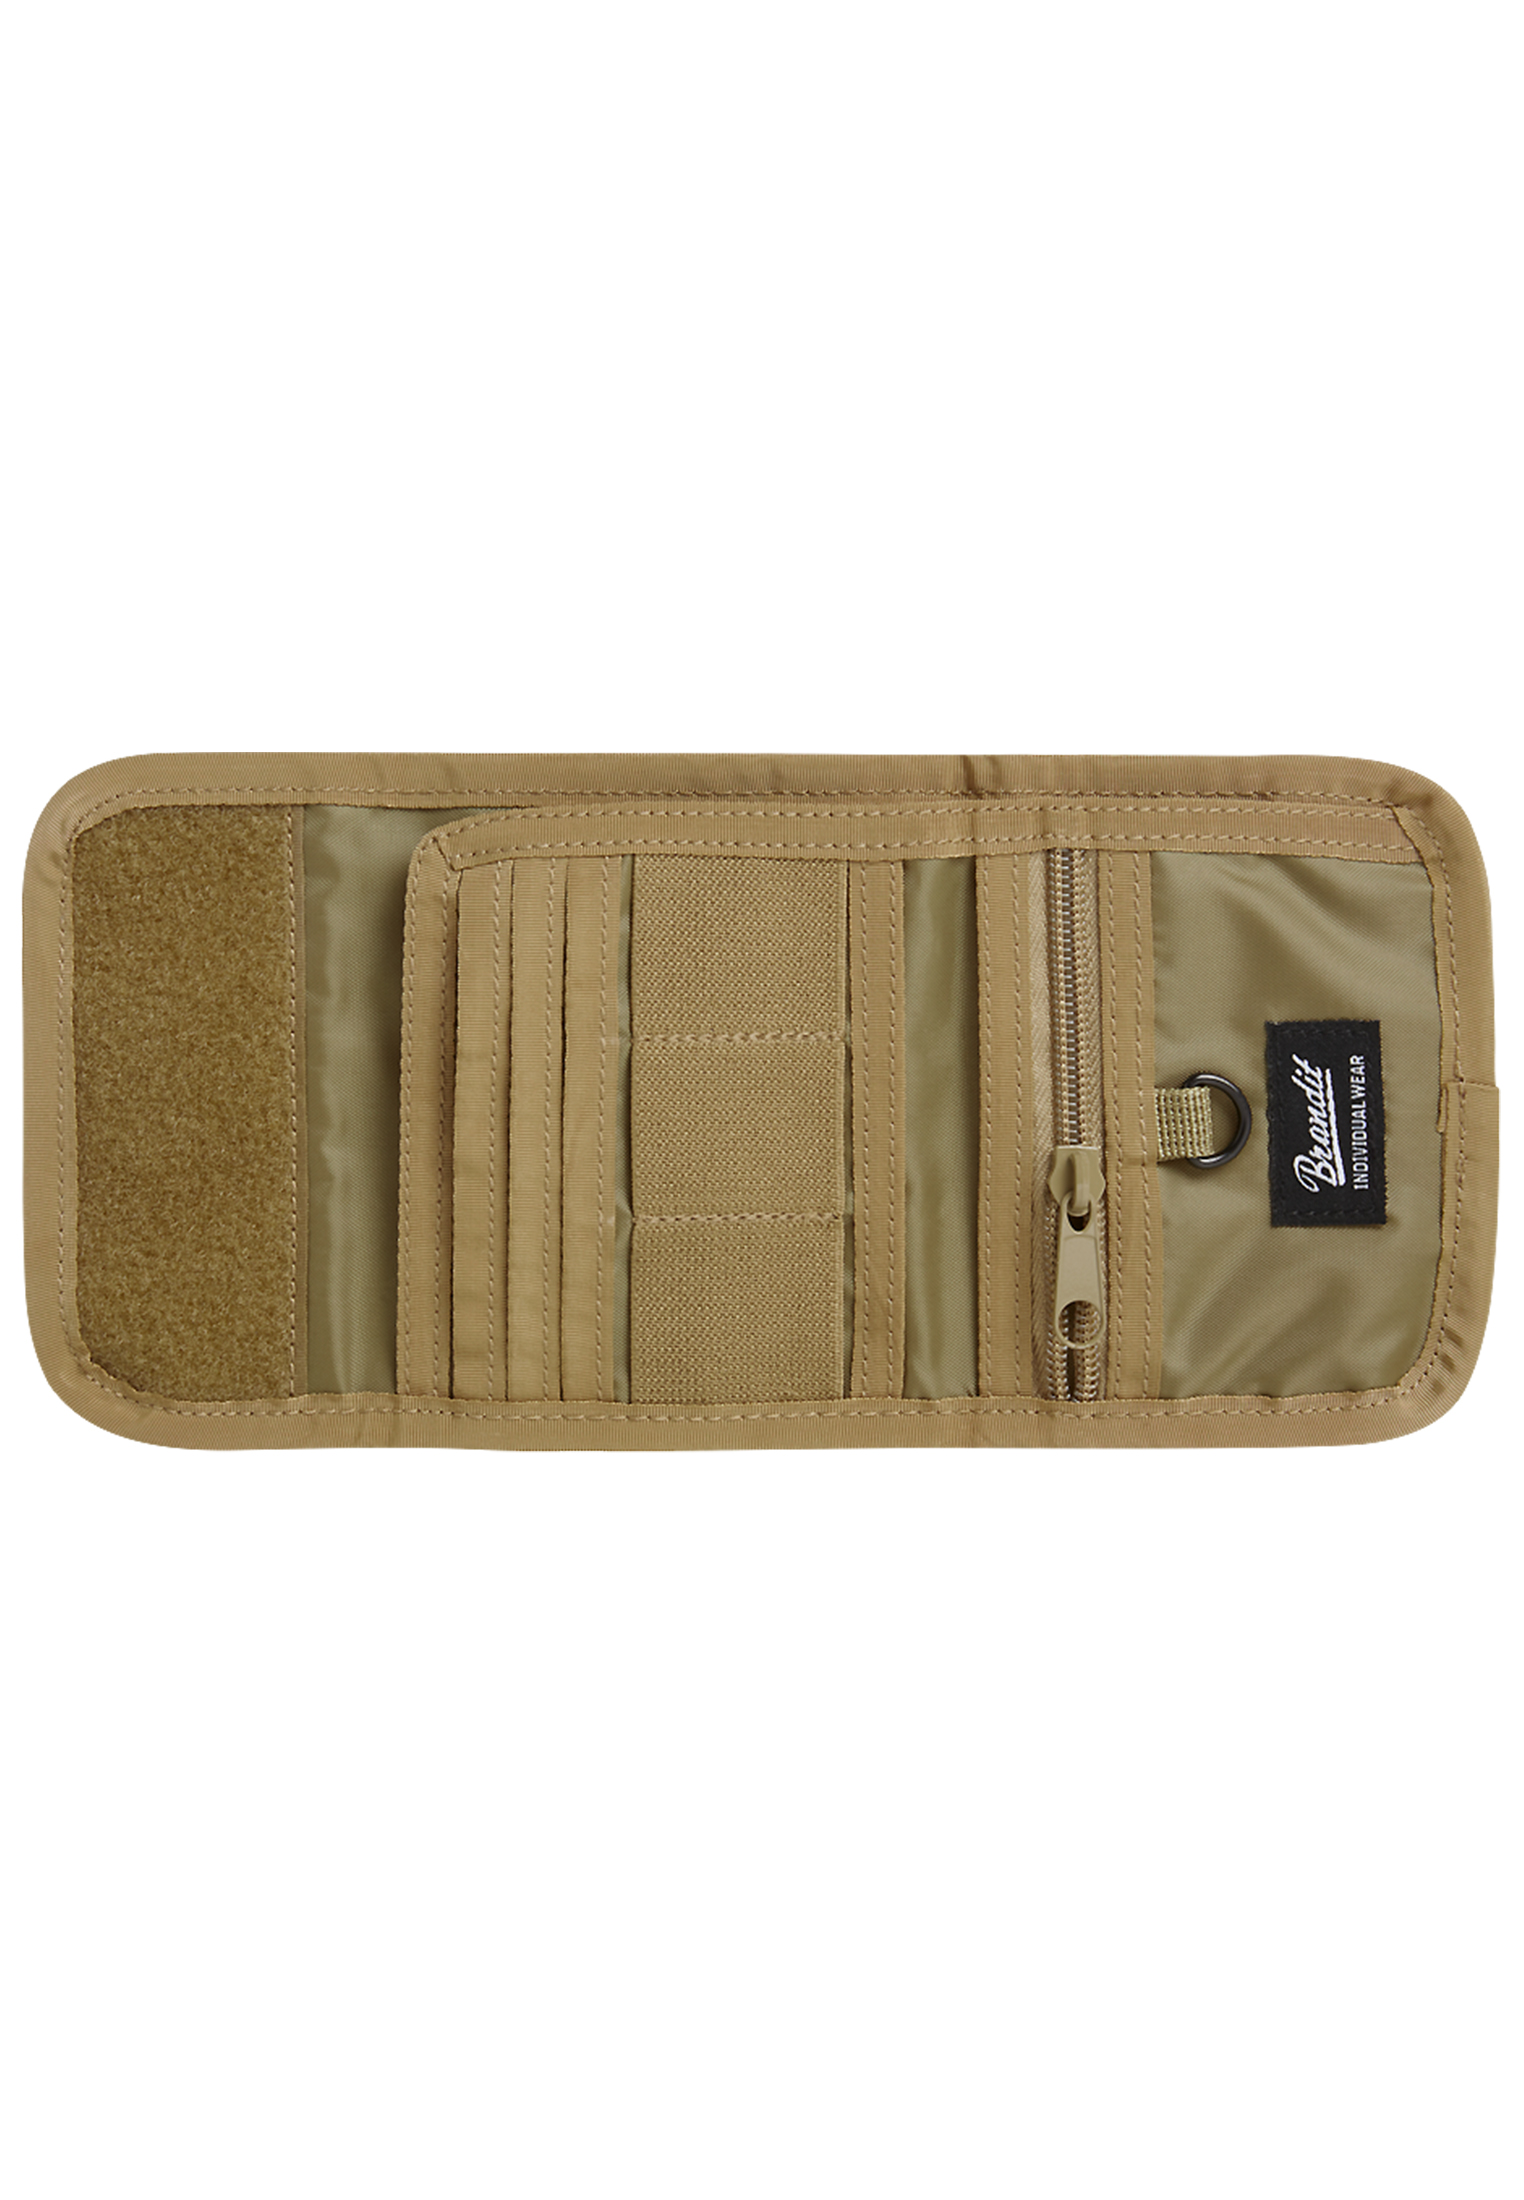 Accessoires wallet five in Farbe tactical camo